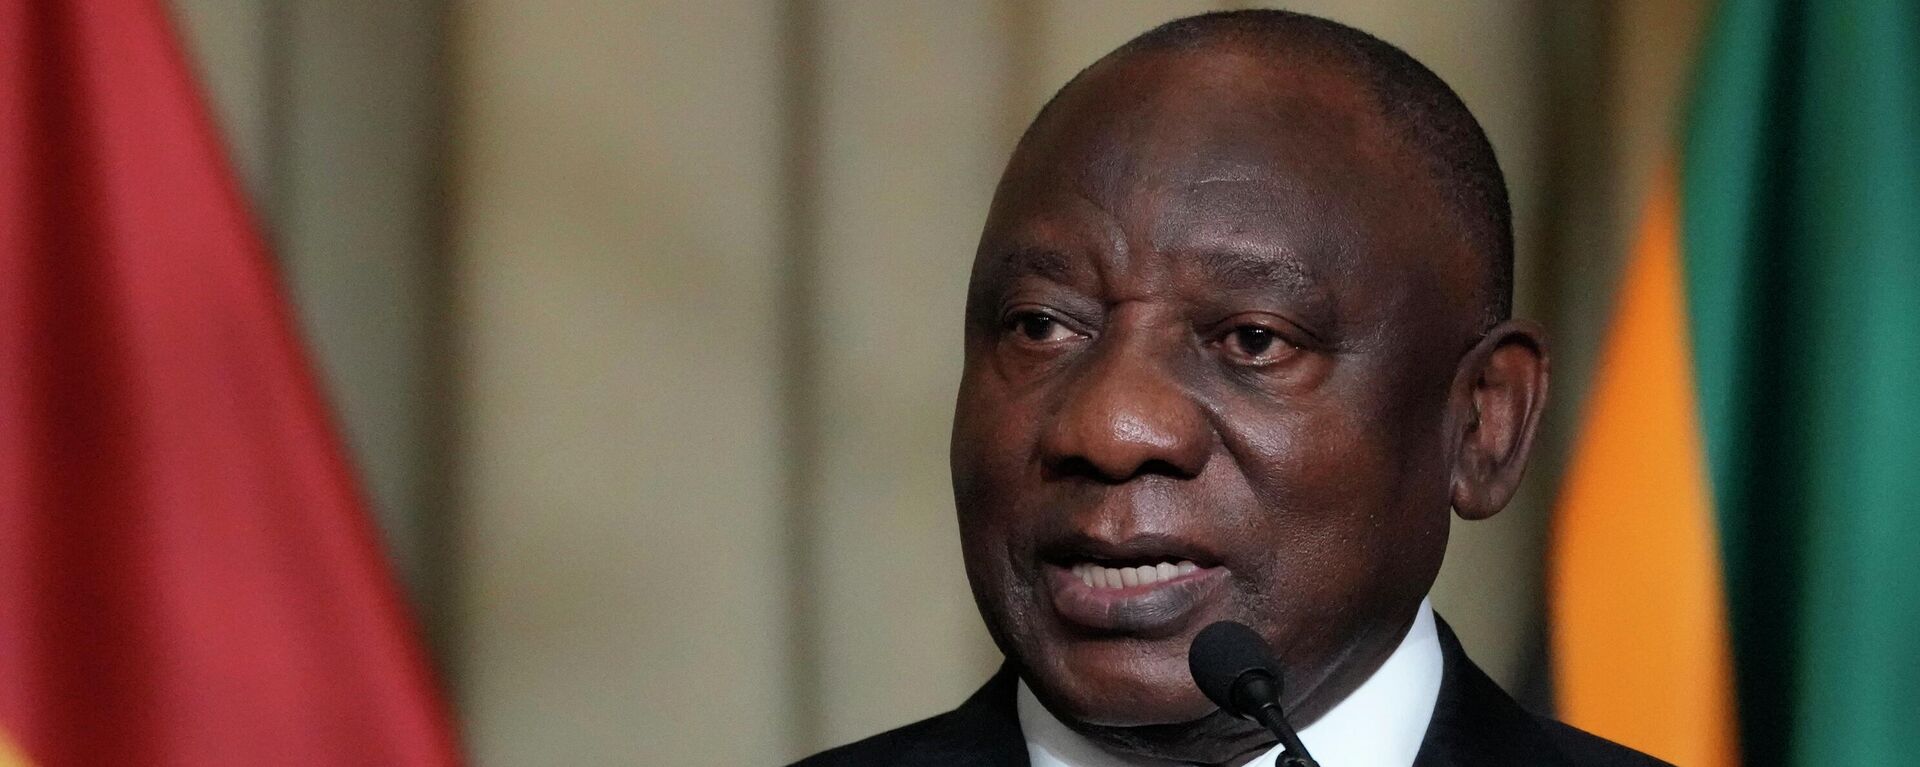 South Africa President Cyril Ramaphosa speaks during a joint media briefing with Spain's Prime Minister Pedro Sanchez at the Union Building in Pretoria, South Africa, Thursday, Oct. 27, 2022.  - Sputnik International, 1920, 16.01.2023